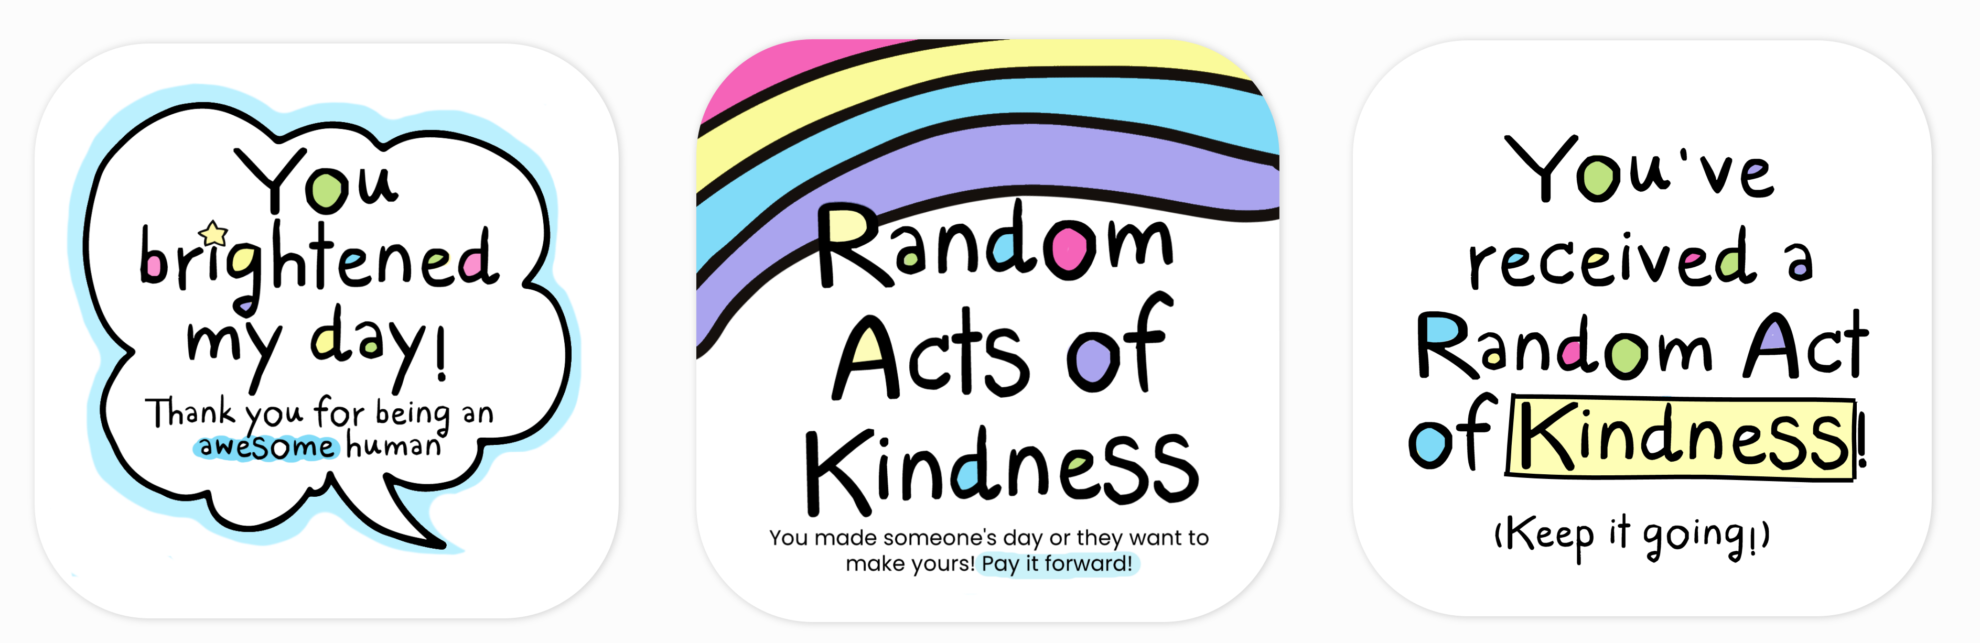 Random Acts Of Kindness Cards Templates Sample Professional Templates